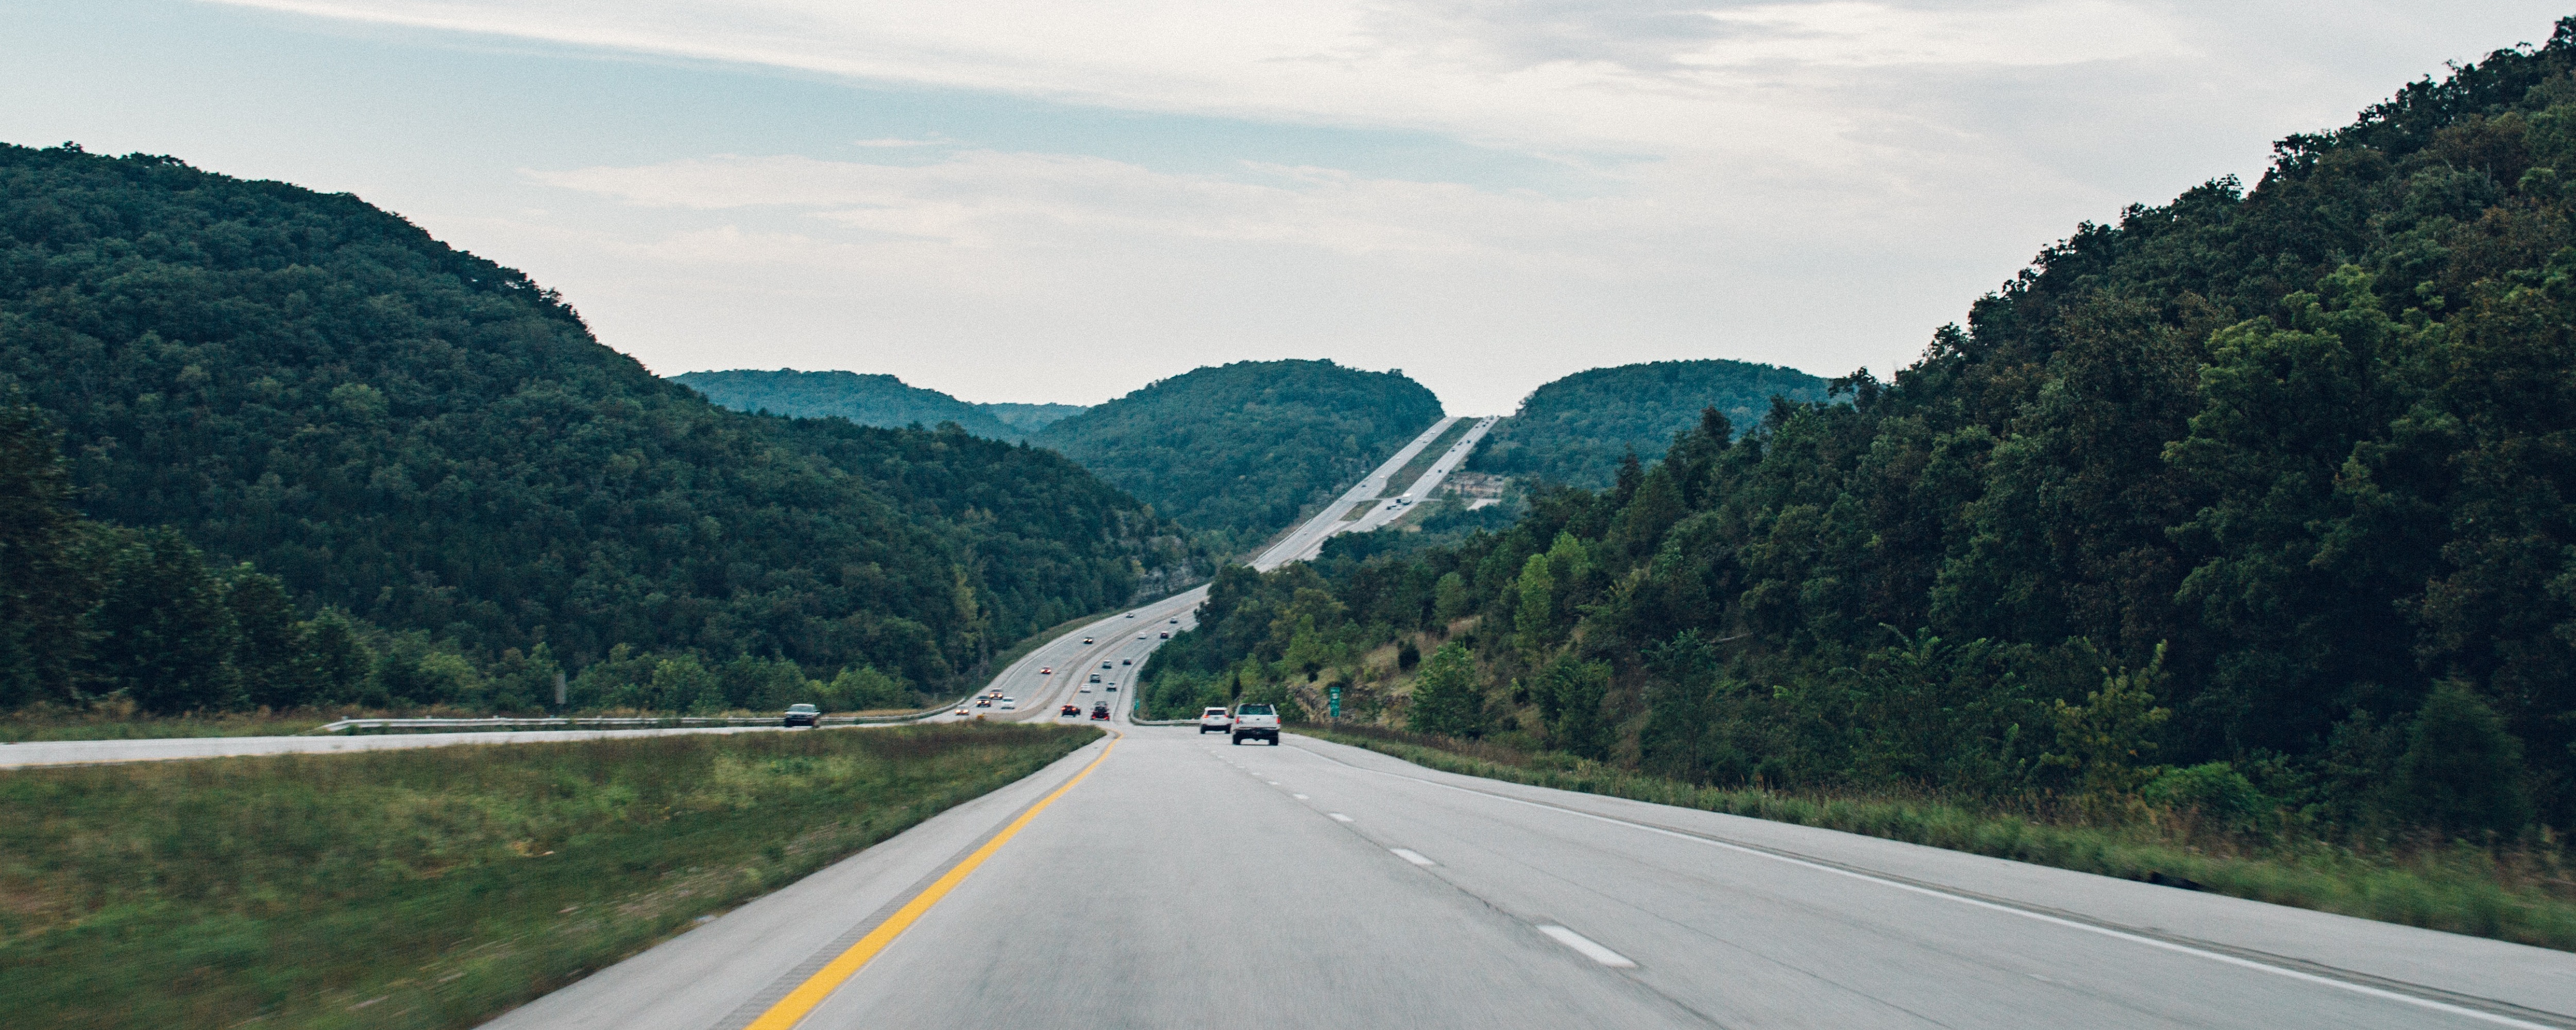 Highway with several cars extends past rolling forested hills.